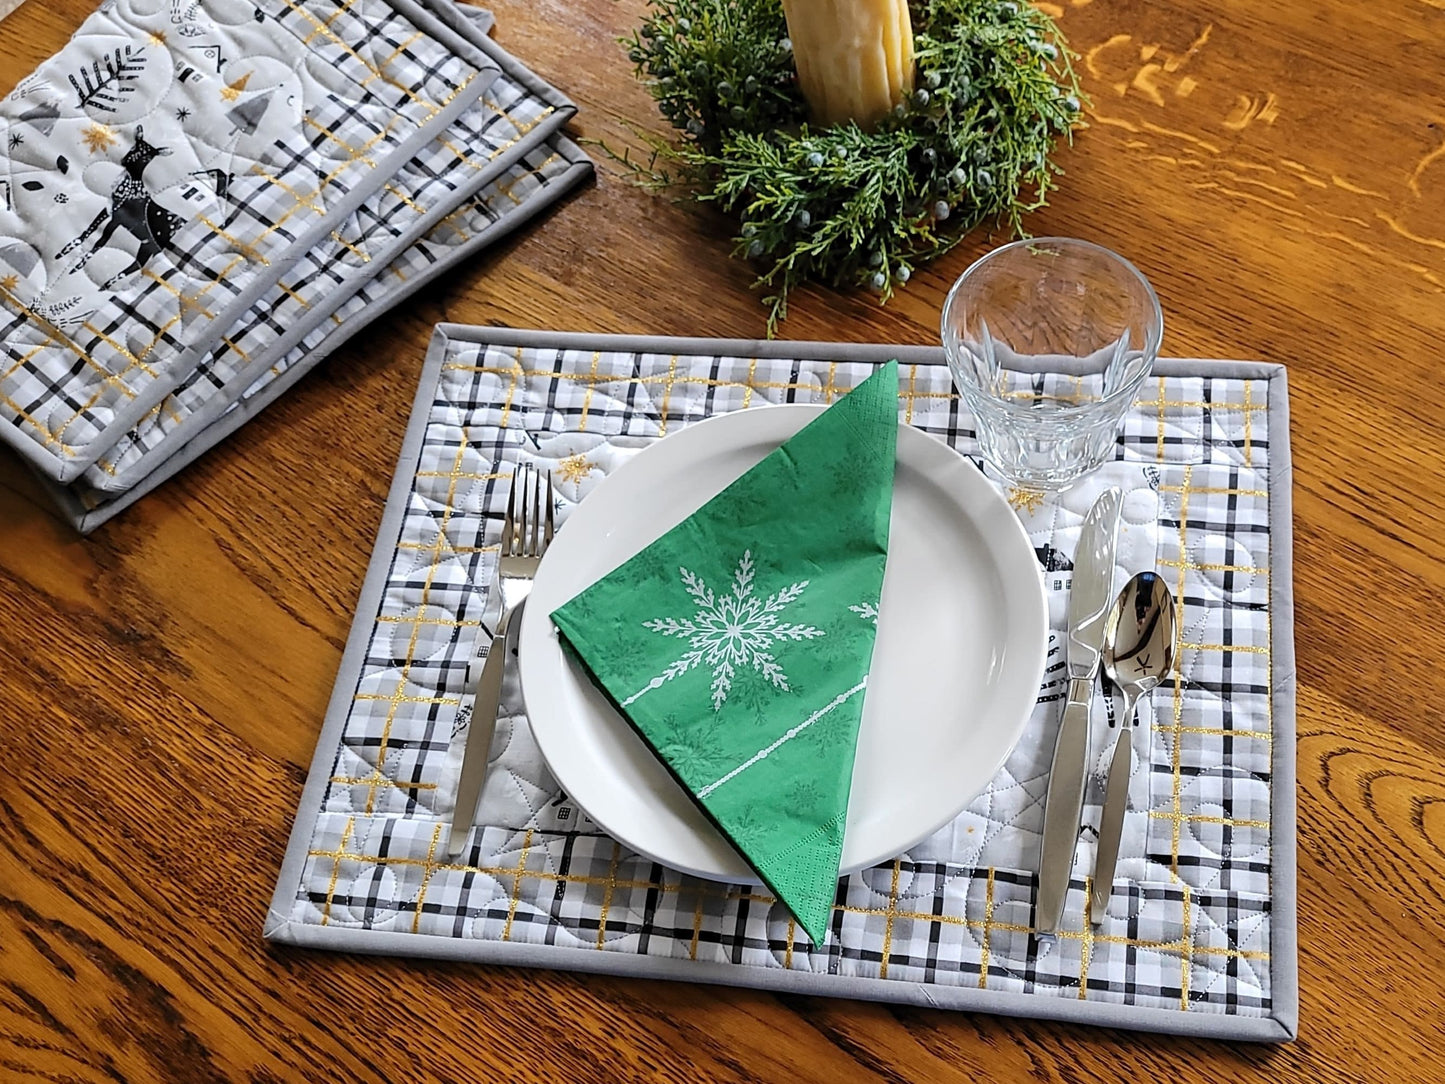 large tablemats hold full place setting